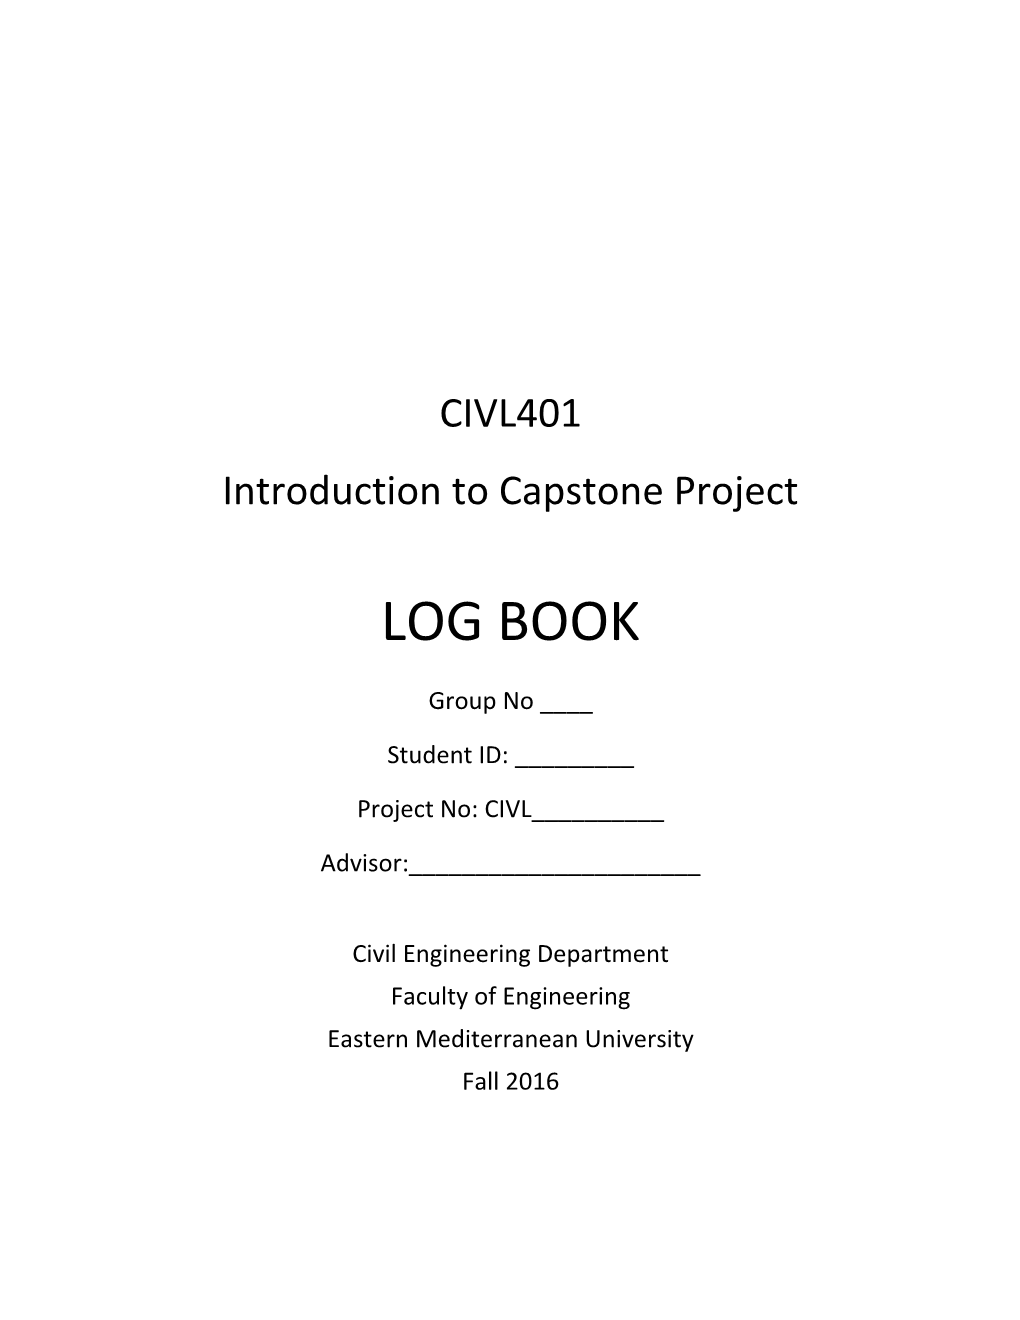 Introduction to Capstone Project